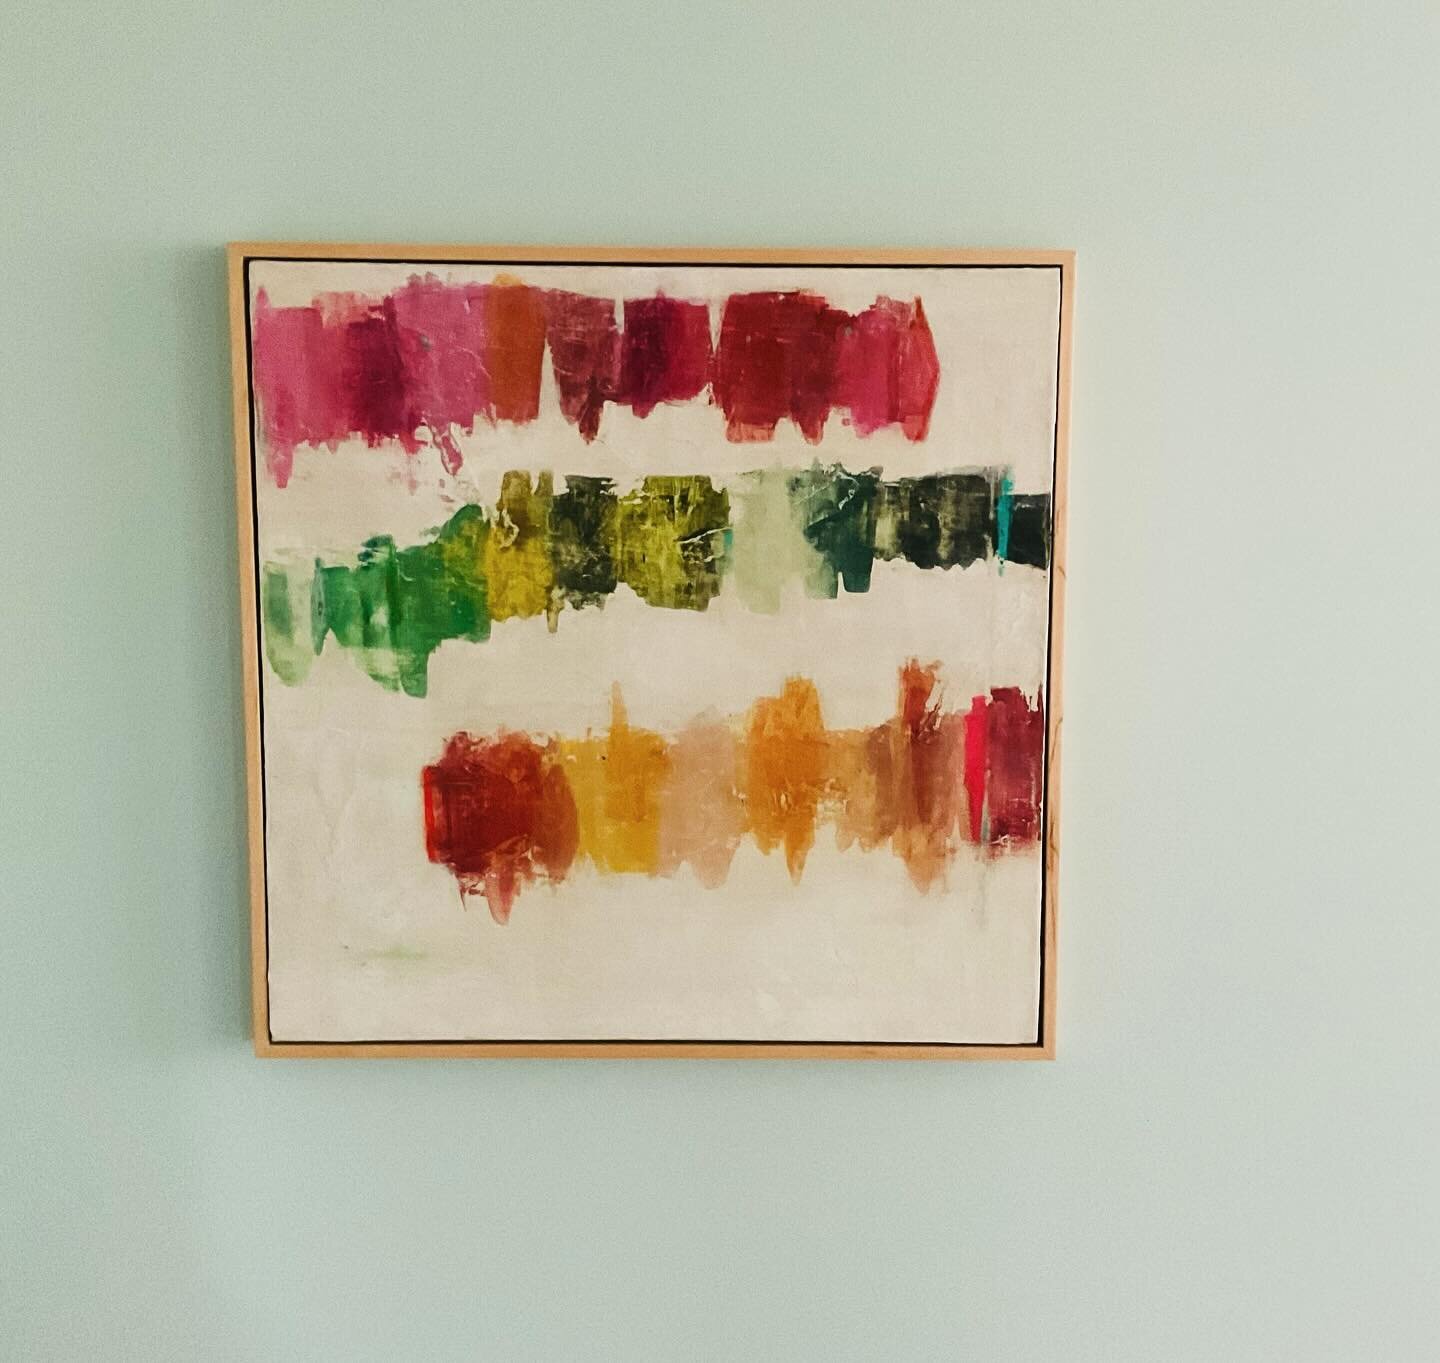 TBT  A spring inspired piece when color explodes all around. Who knows where it all comes from, I just hope it keeps coming!
.
.
.#colorismyjam #abstractpainting #tbt #interiordesign #contemporaryart #curator #artgallery #magcontemporart #abstractoft